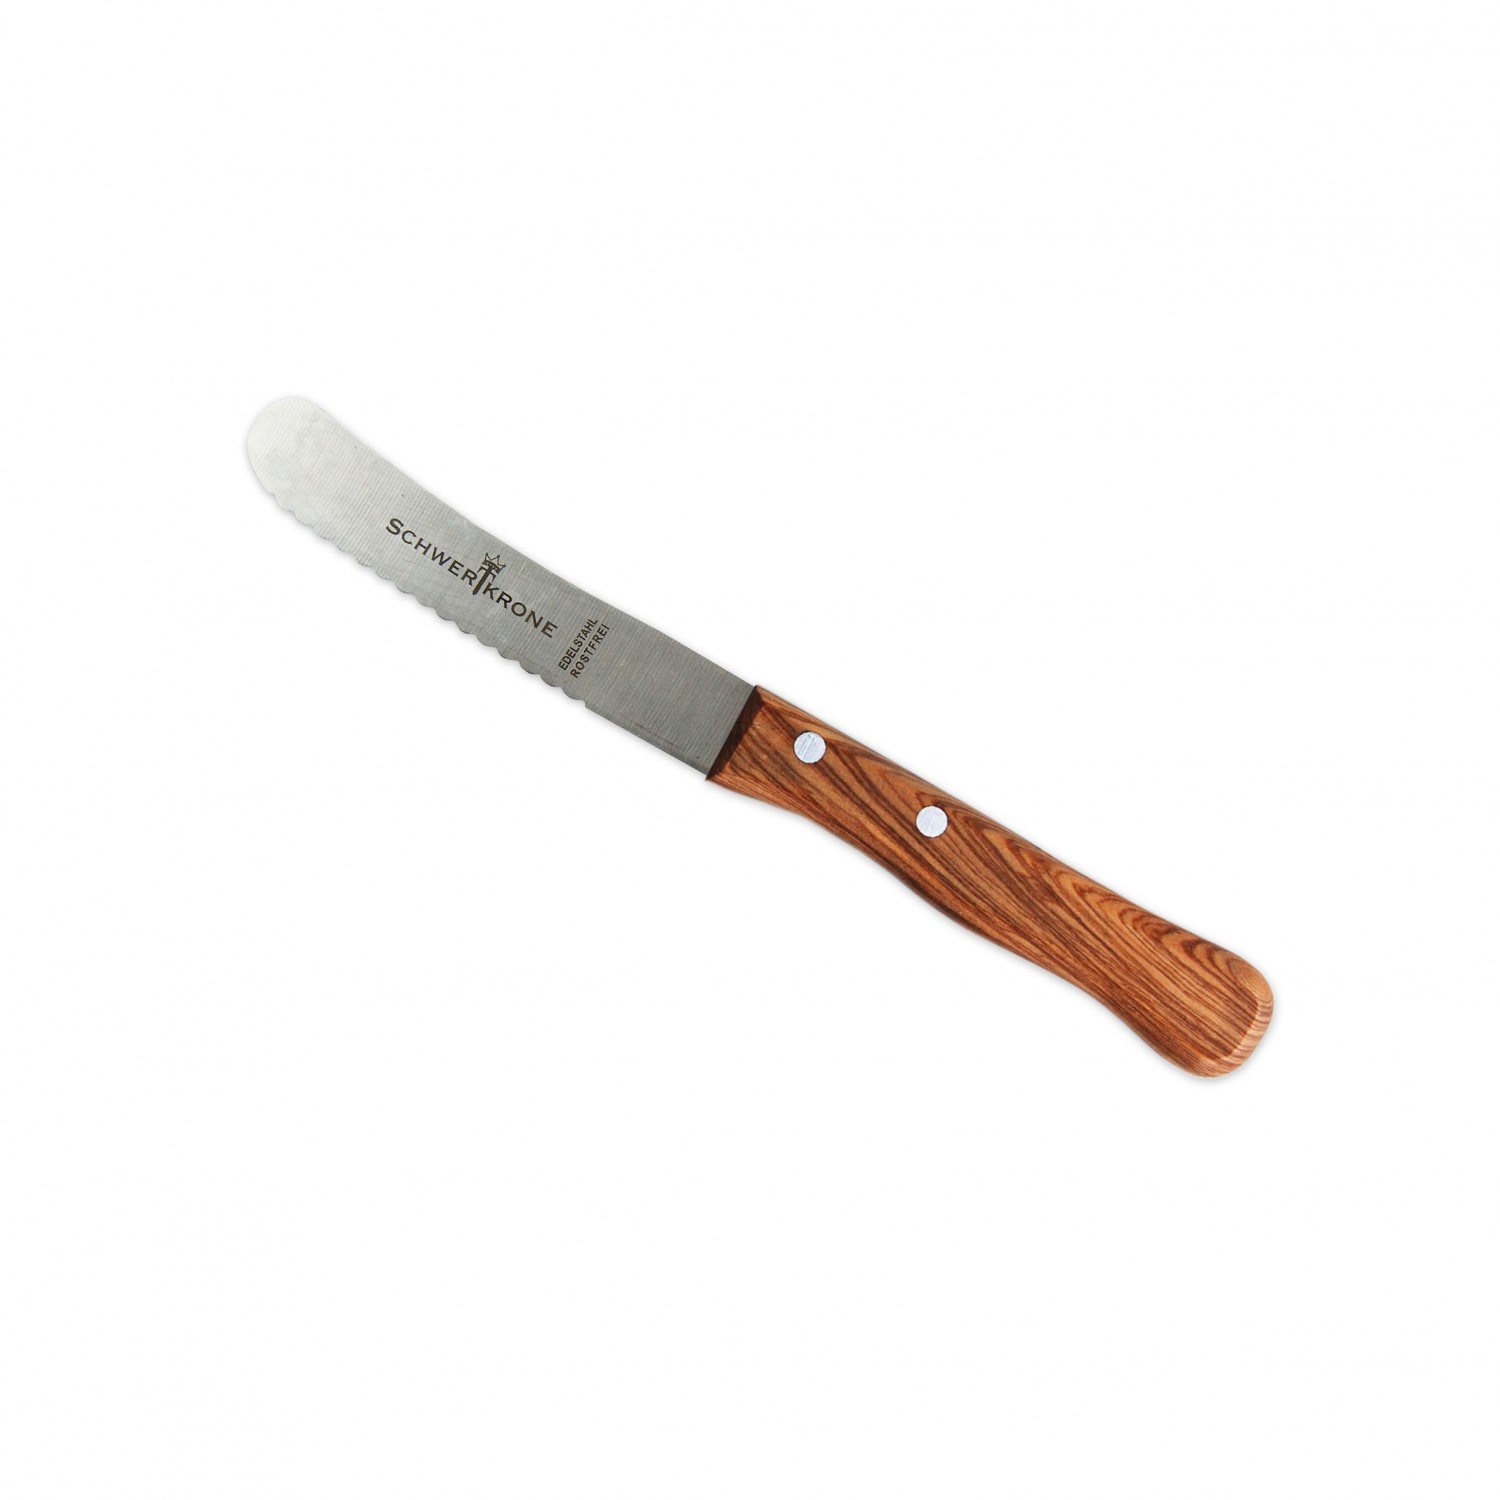 Olive Wood Bread Roll Knife Stainless Steel Blade - D.O.M.